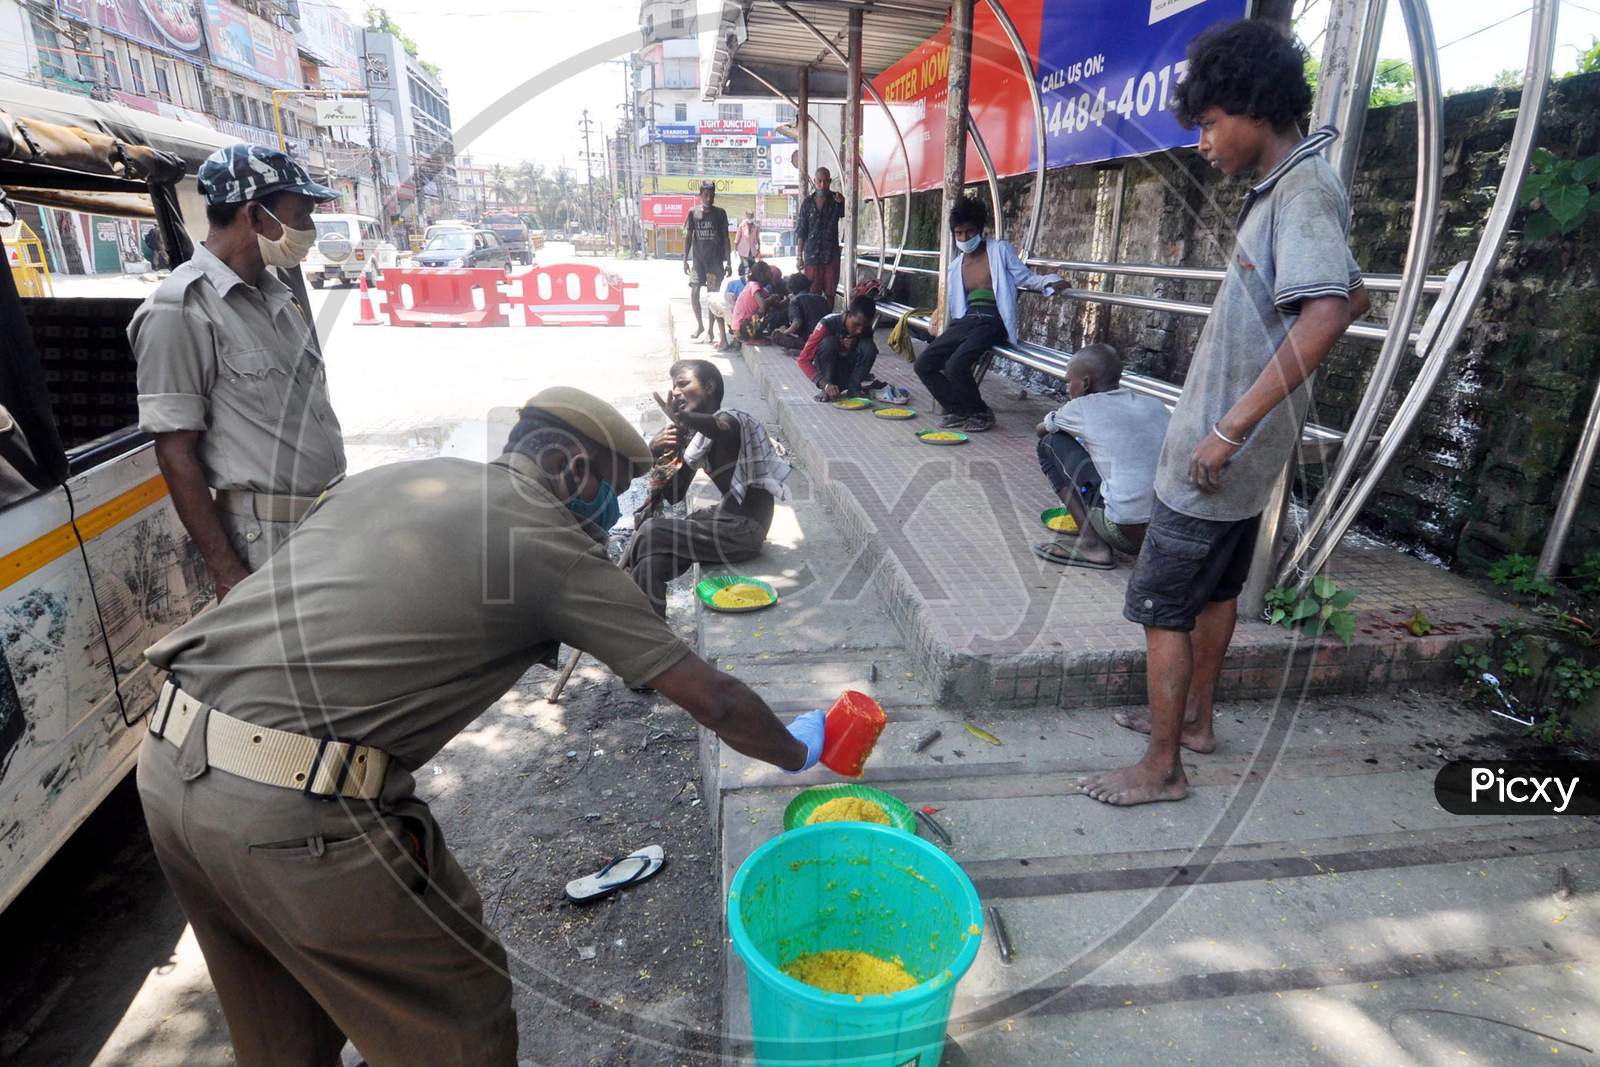 Police officers distribute food to homeless people during the lockdown imposed by the Assam government to control the spread of coronavirus in Guwahati, Assam on July 04, 2020